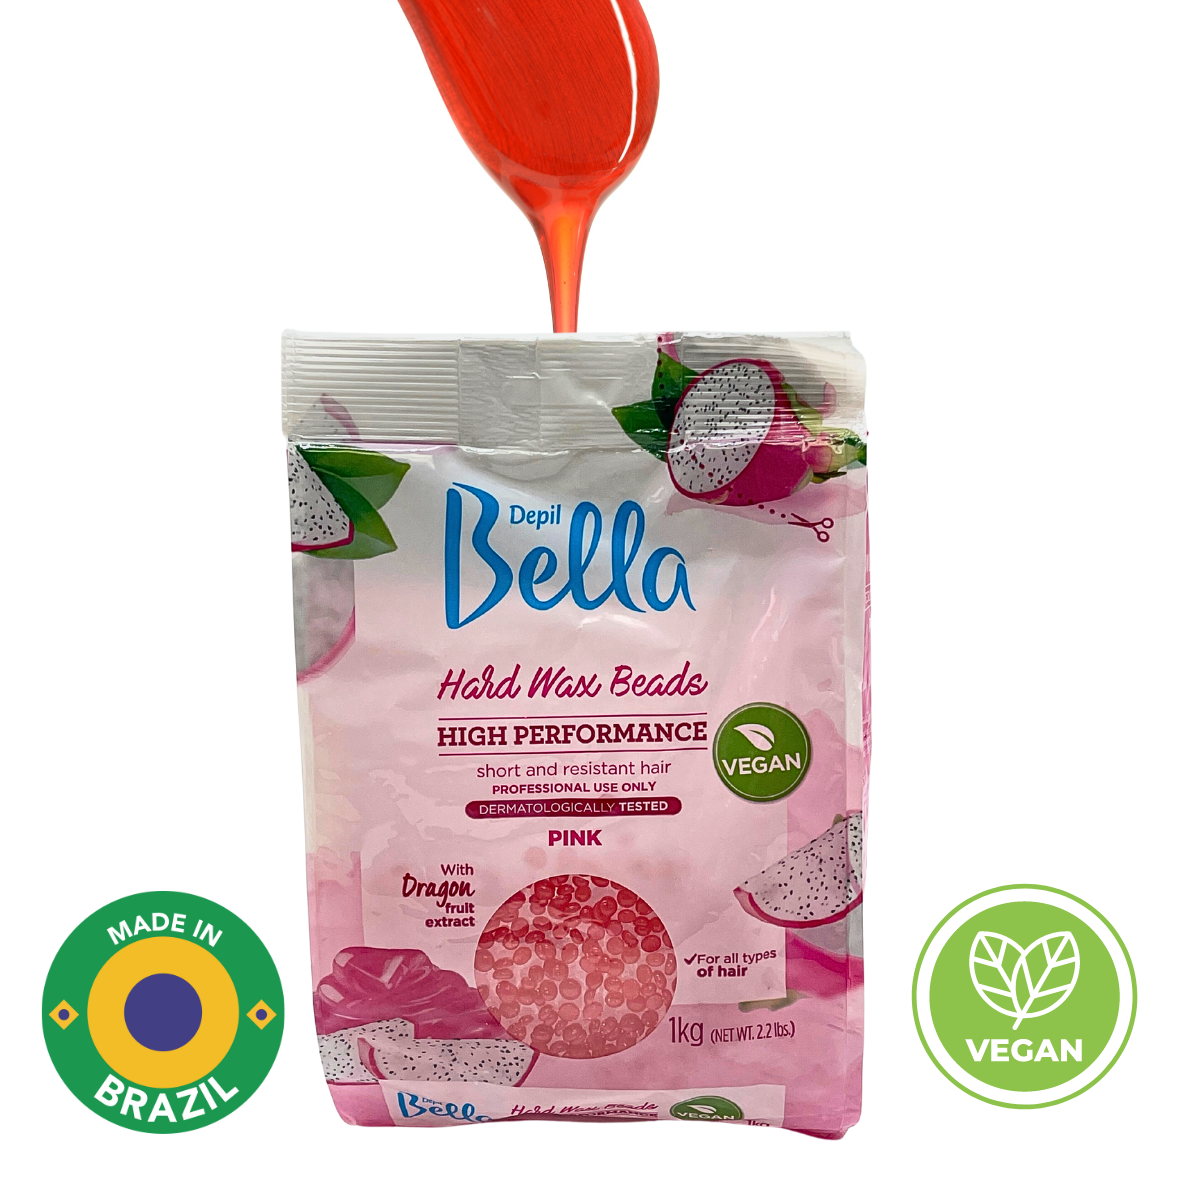 Depil Bella Pink Pitaya Confetti Hard Wax Beads - High-Performance Hair Removal, Vegan 2.2 lbs (20 Units Offer) - Buy professional cosmetics dedicated to hair removal